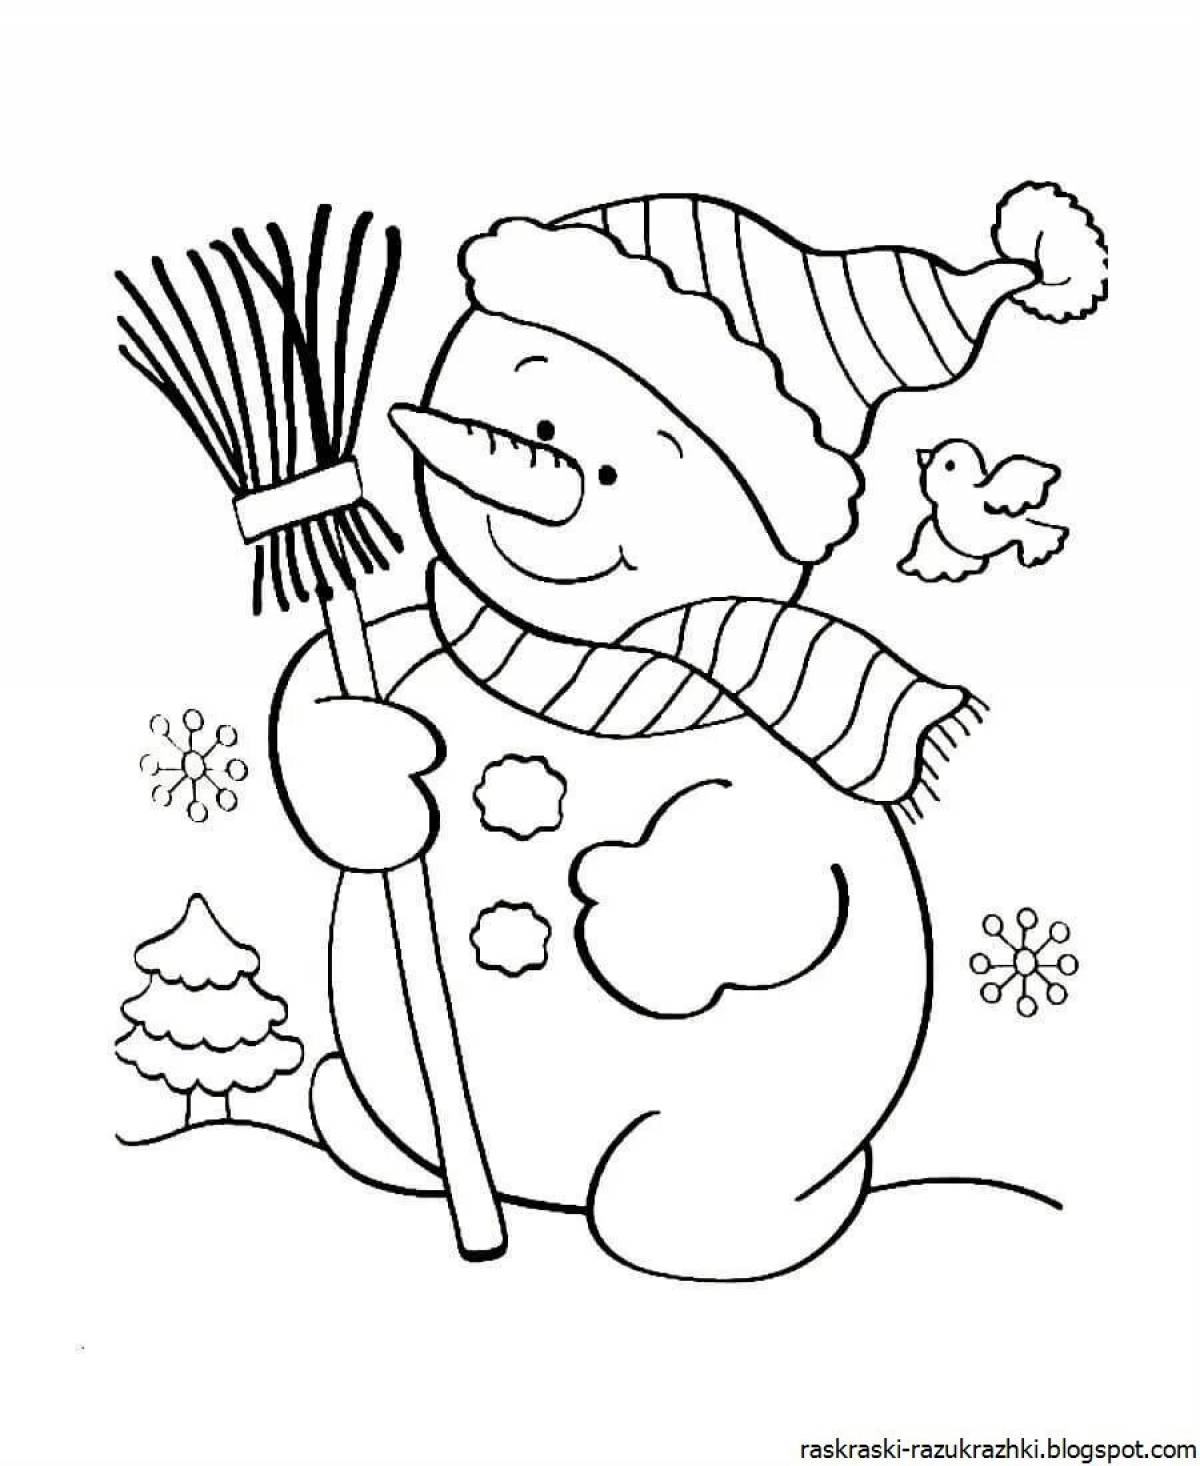 Scalloped snowman coloring book for kids